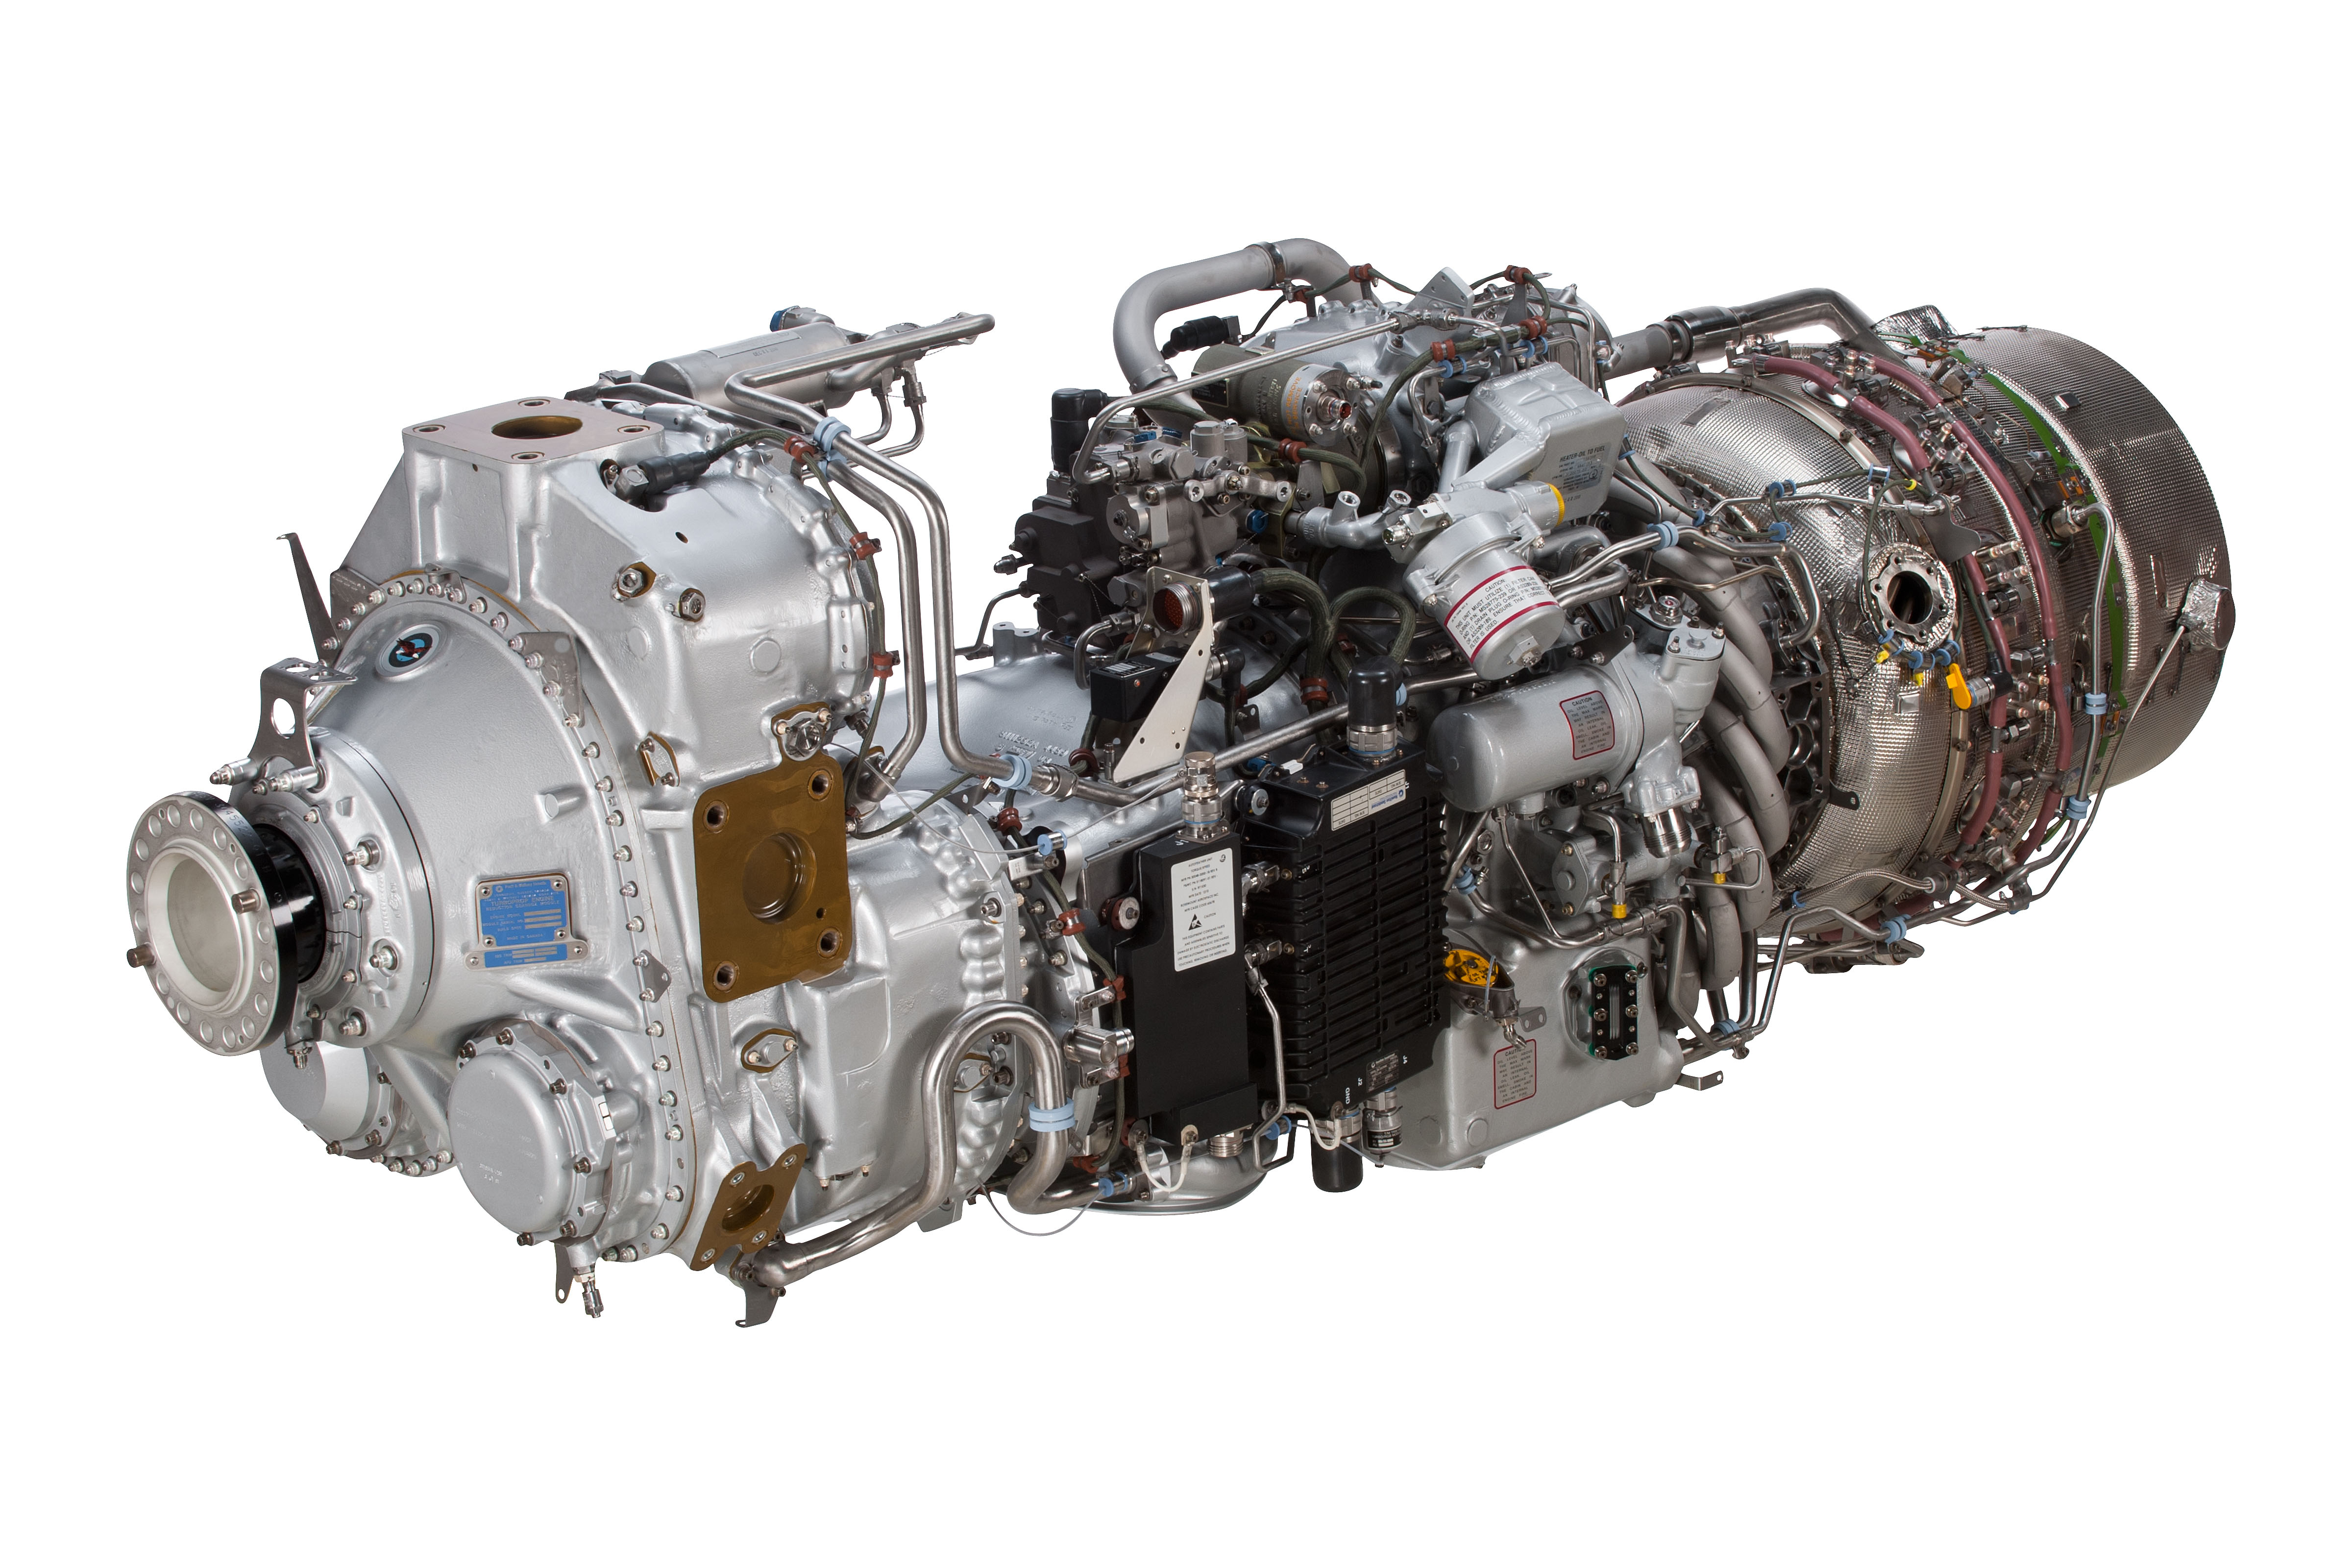 Pratt & Whitney Canada successfully conducts 100% SAF flight test with PW127M Engines powering Braathens’ ATR Aircraft